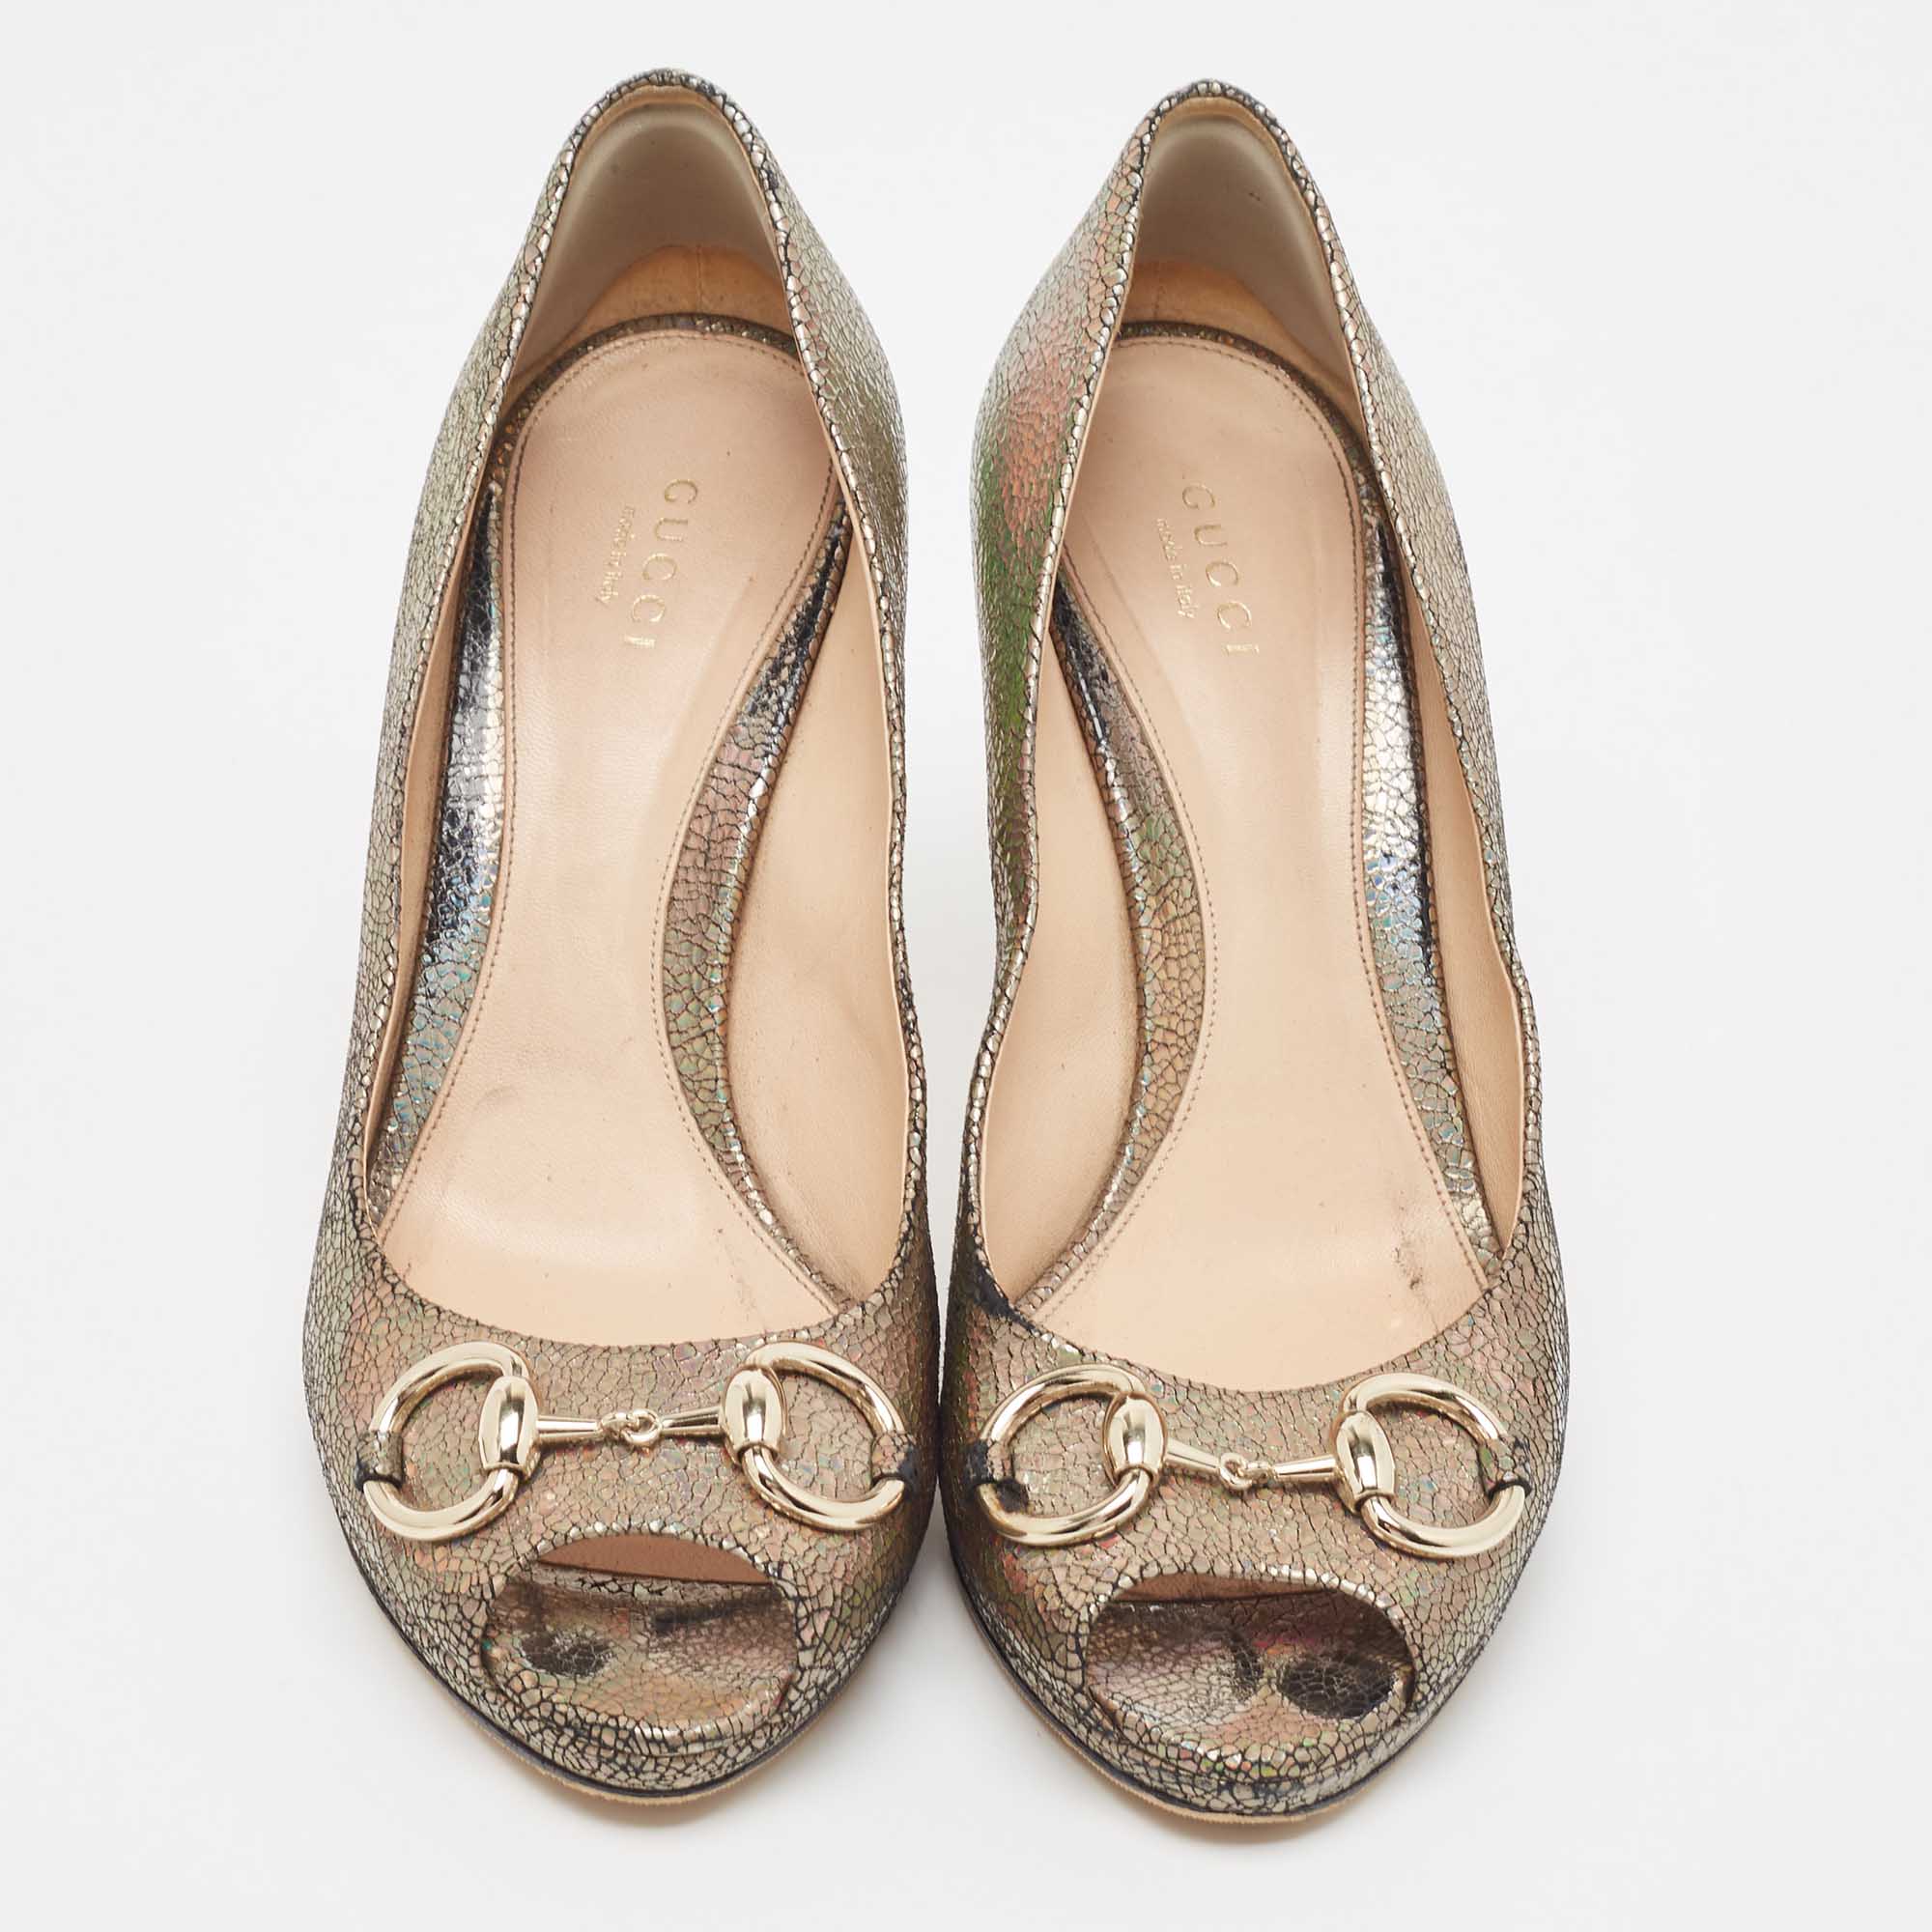 Gucci Metallic Laminated Suede New Hollywood Platform Pumps Size 38.5